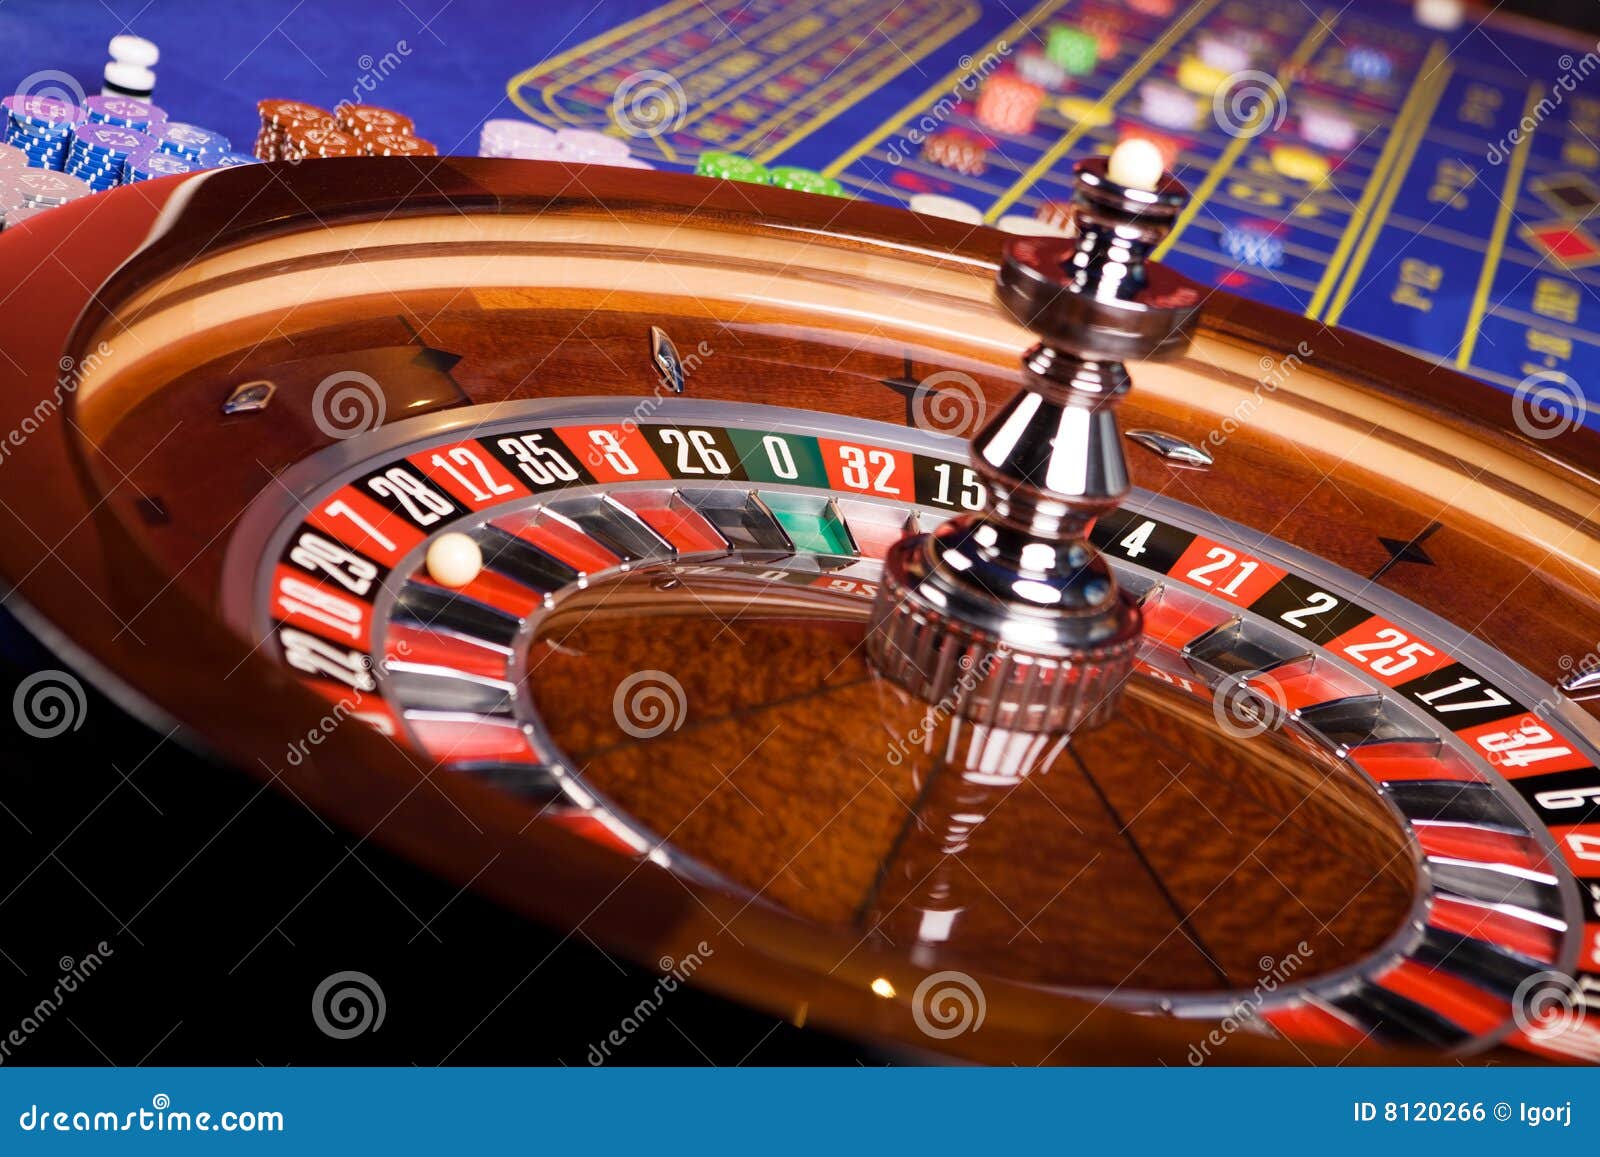 roulette and roulette table in casino